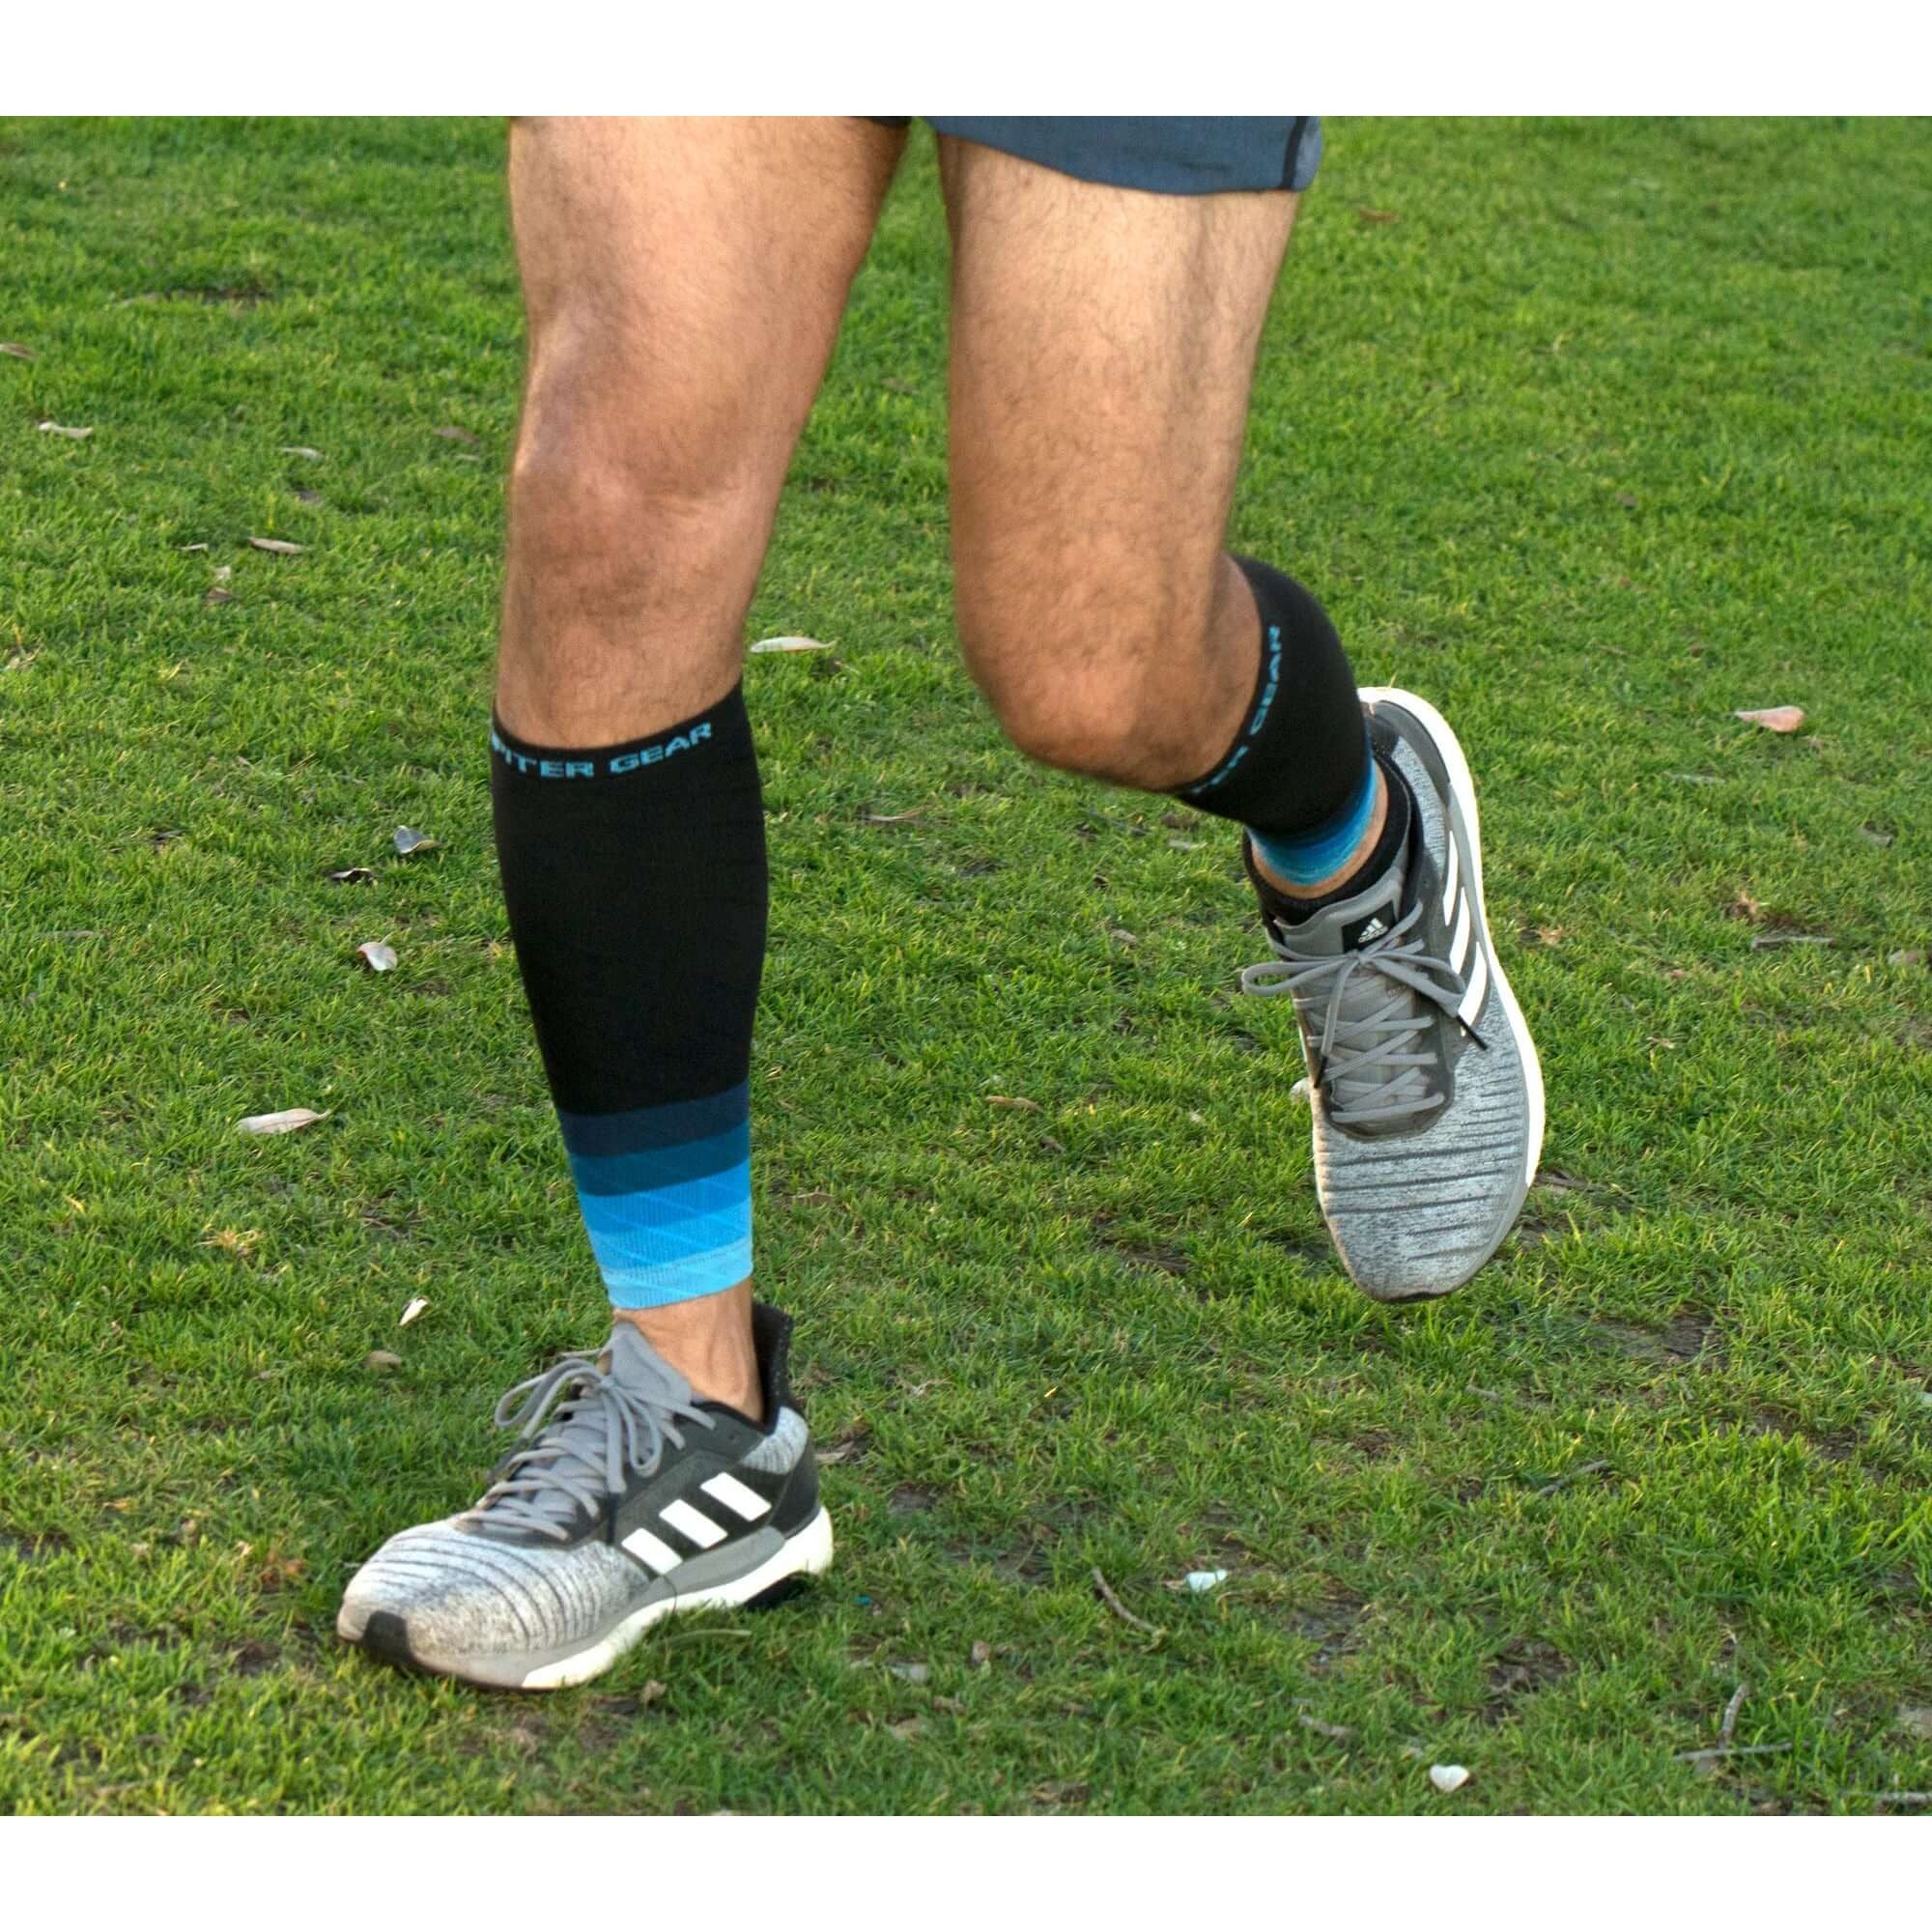 Endurance Compression Calf & Leg Sleeve for Running and Hiking - KME means the very best